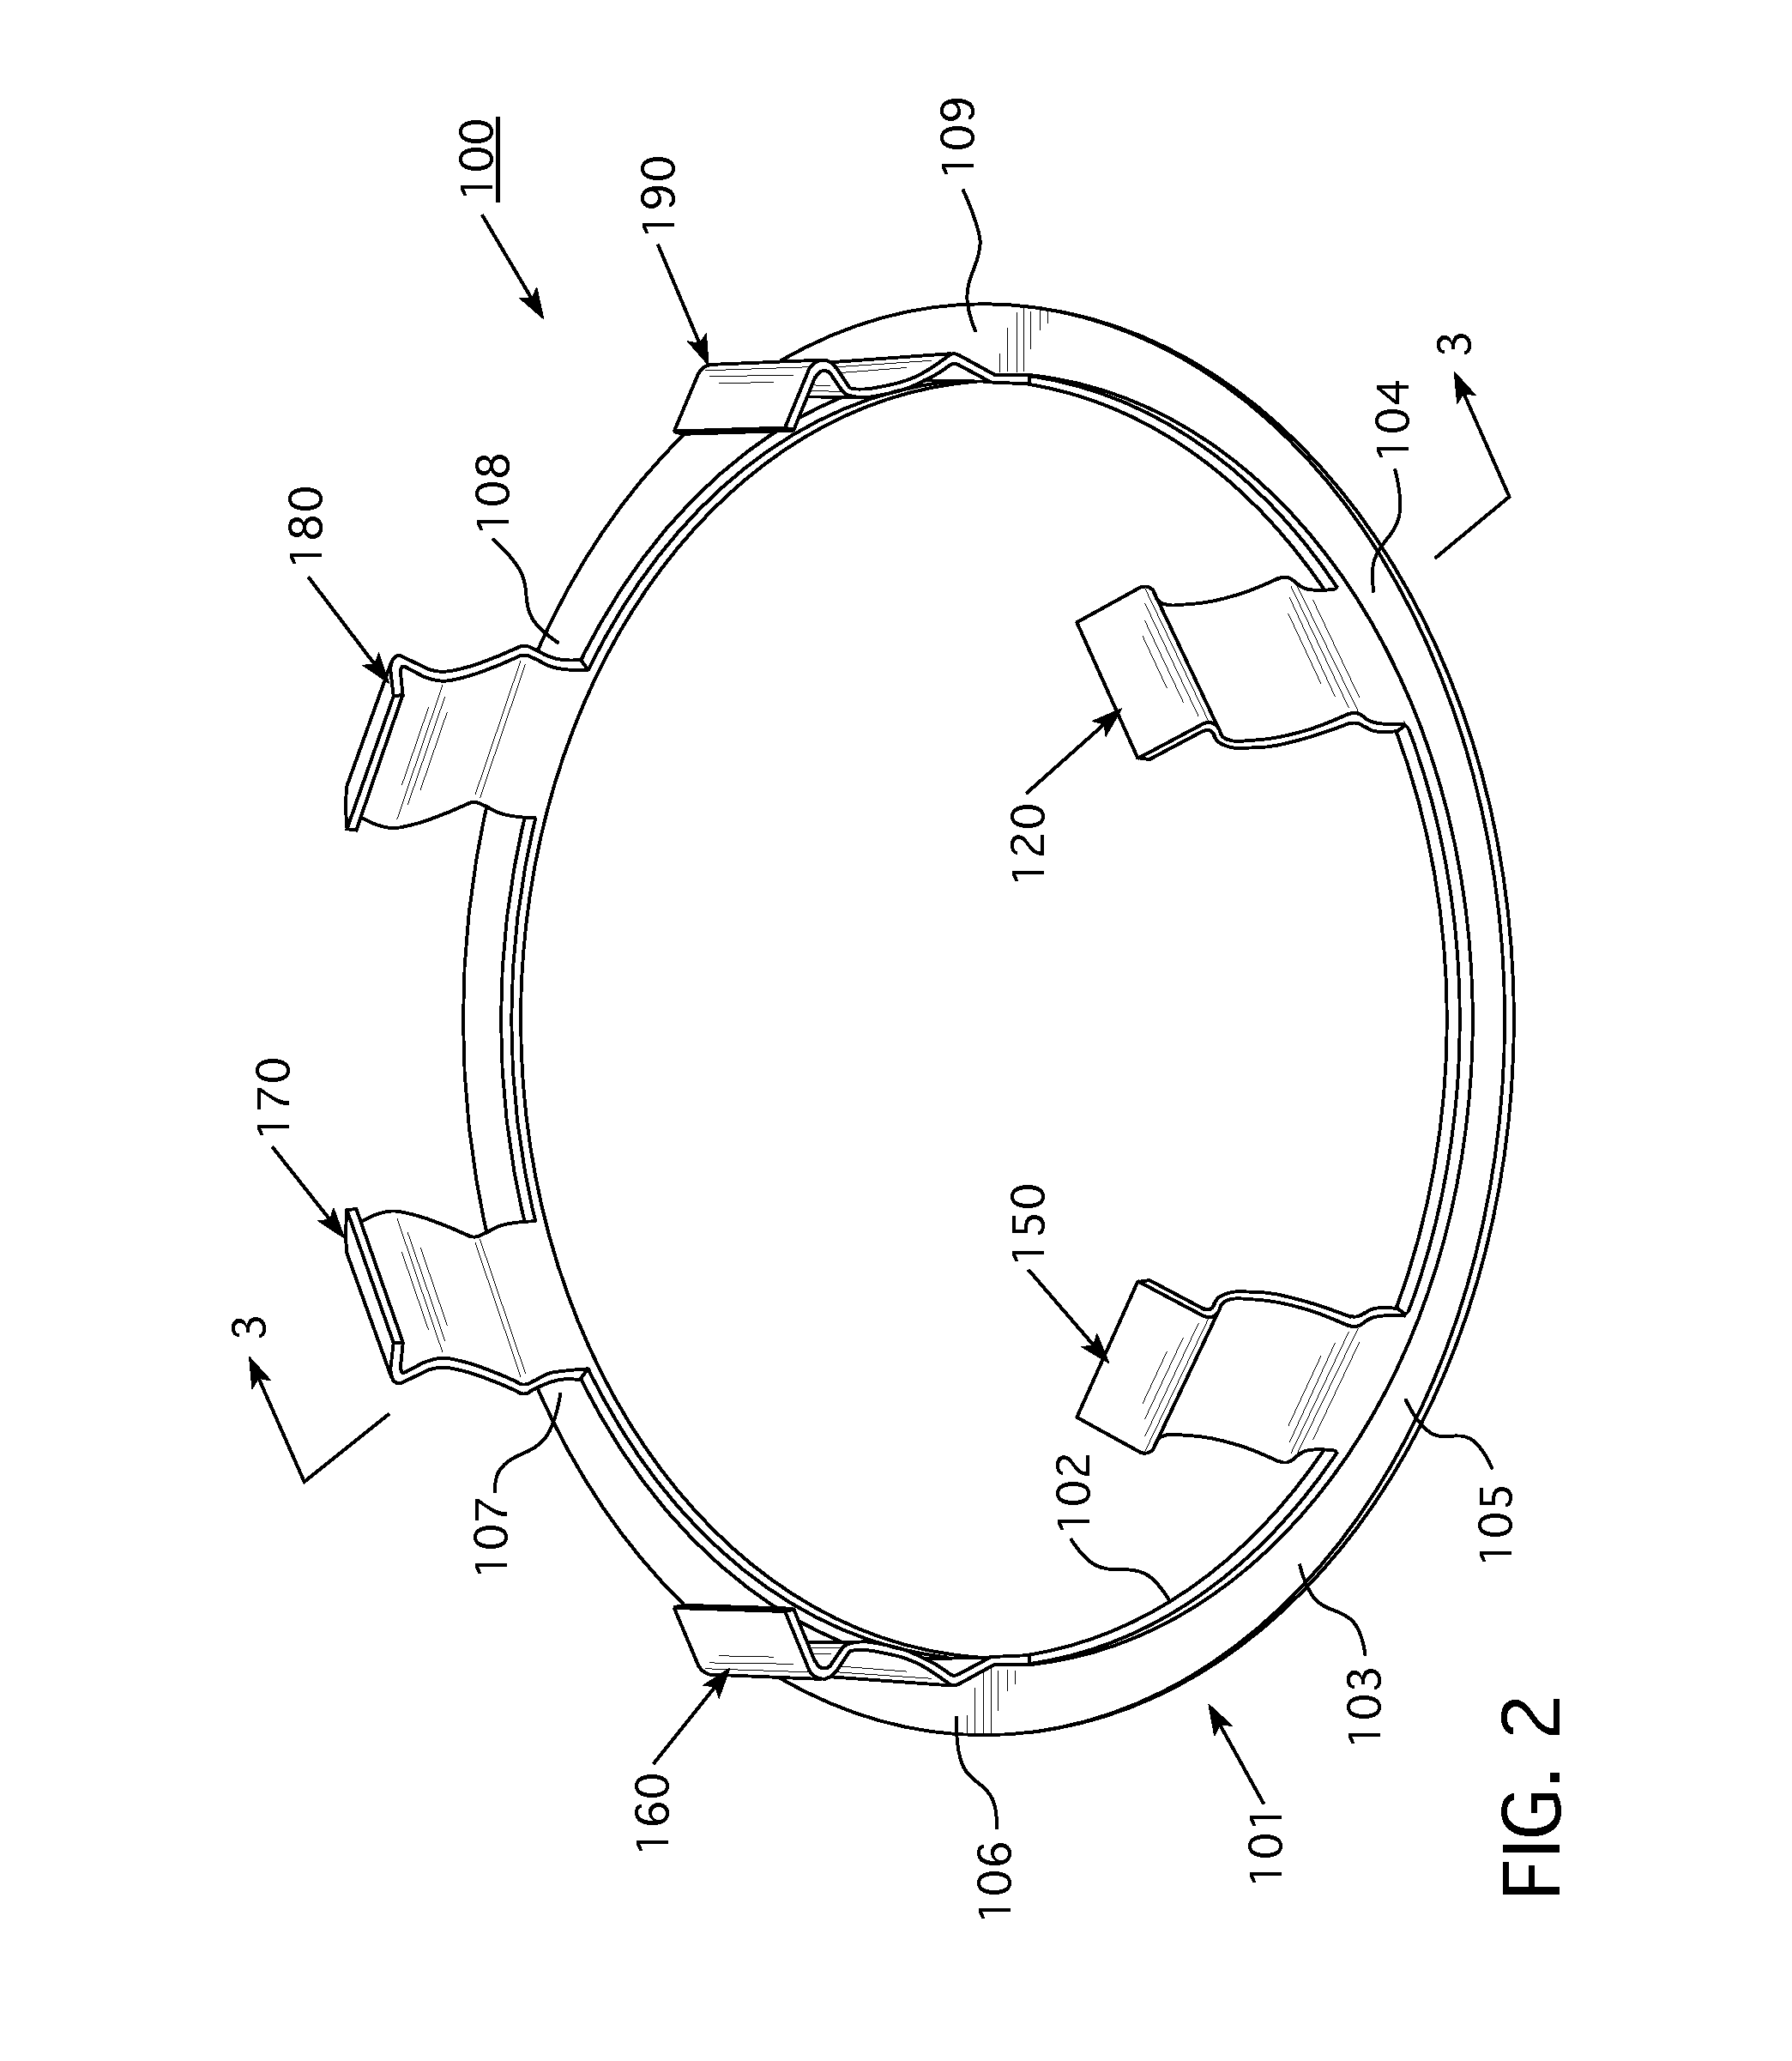 Vacuum interrupter, retaining clip therefor and associated method